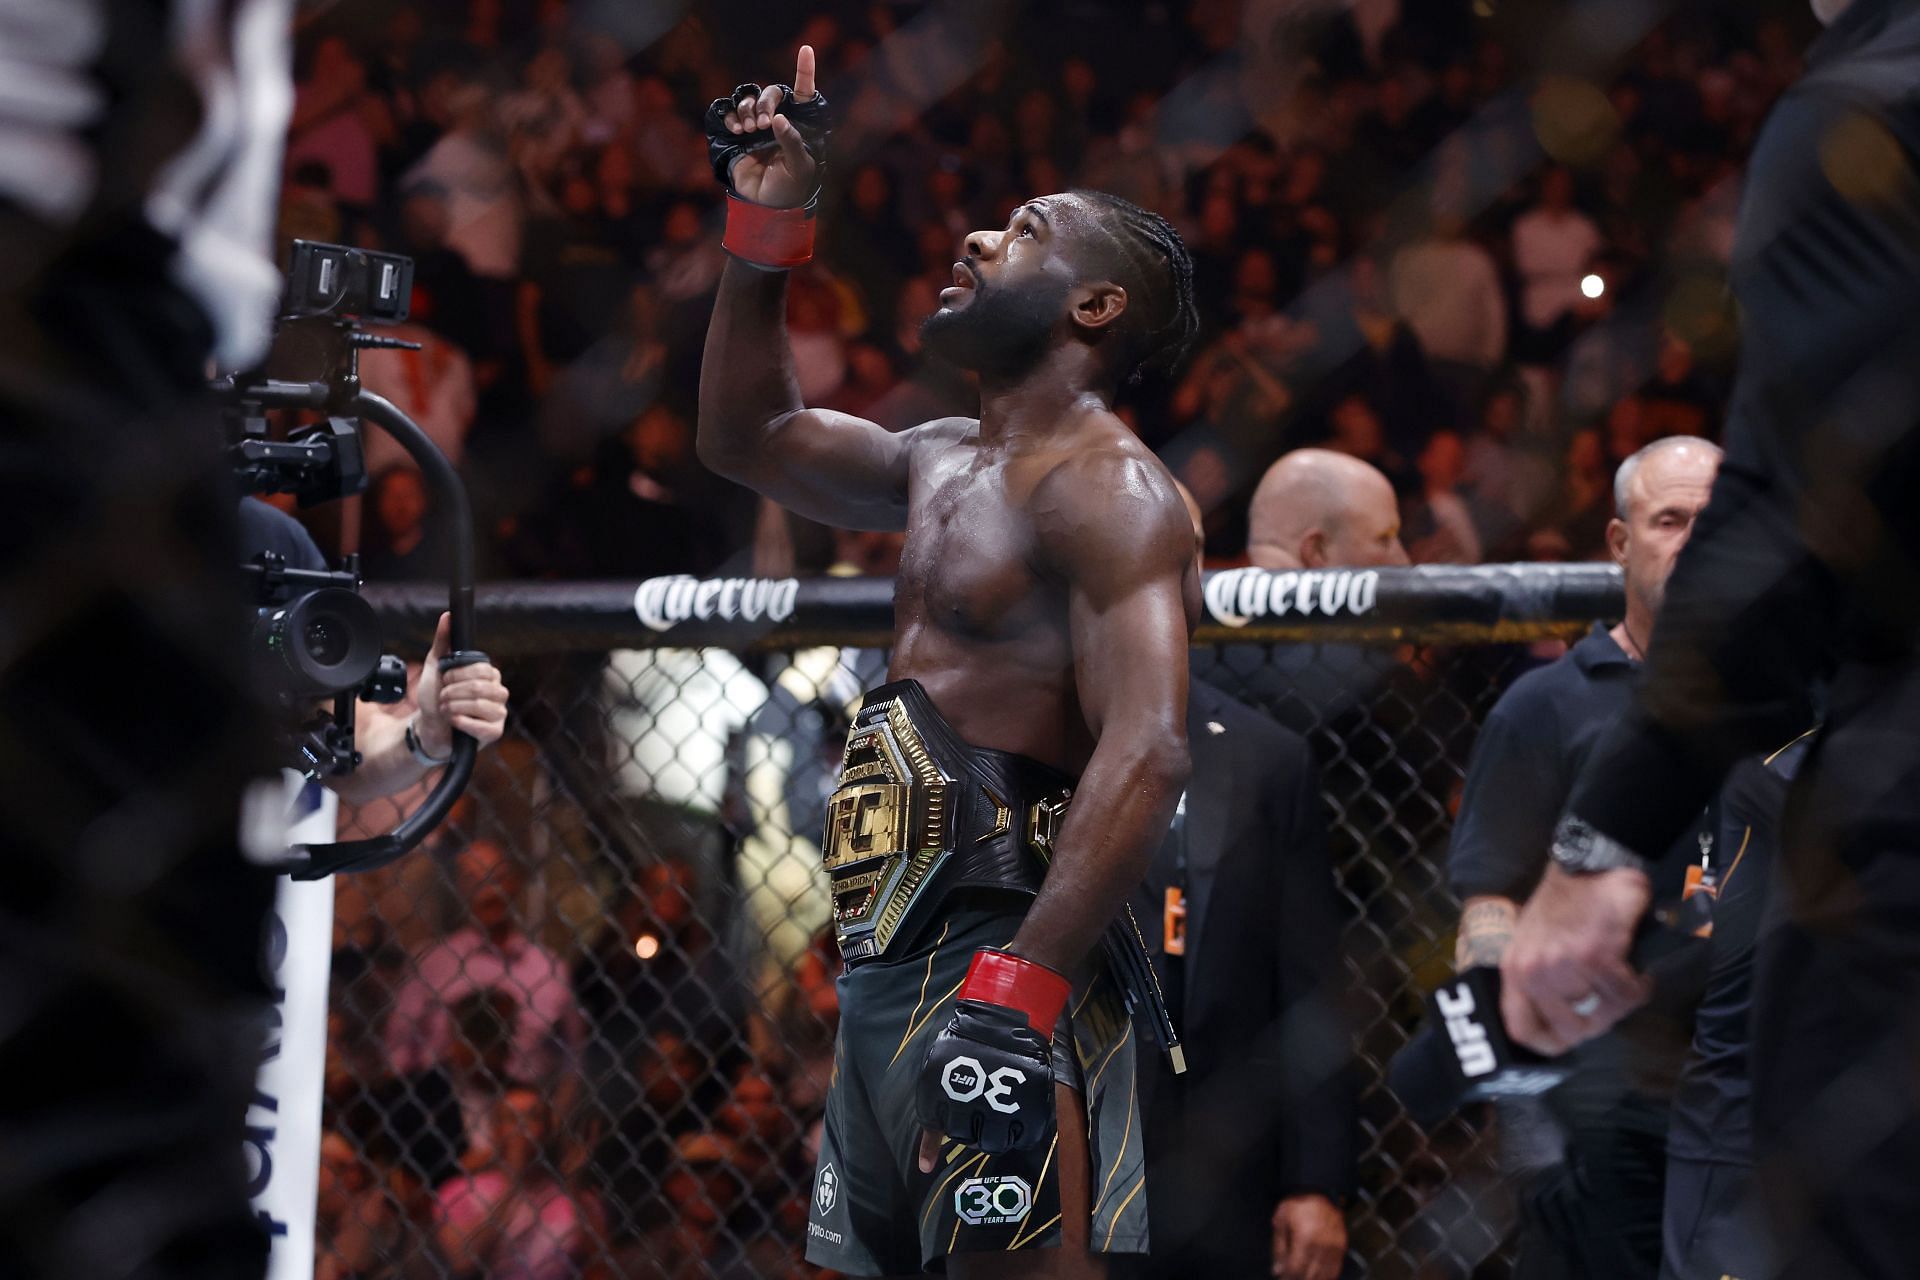 Aljamain Sterling remains the bantamweight champion after overcoming Henry Cejudo